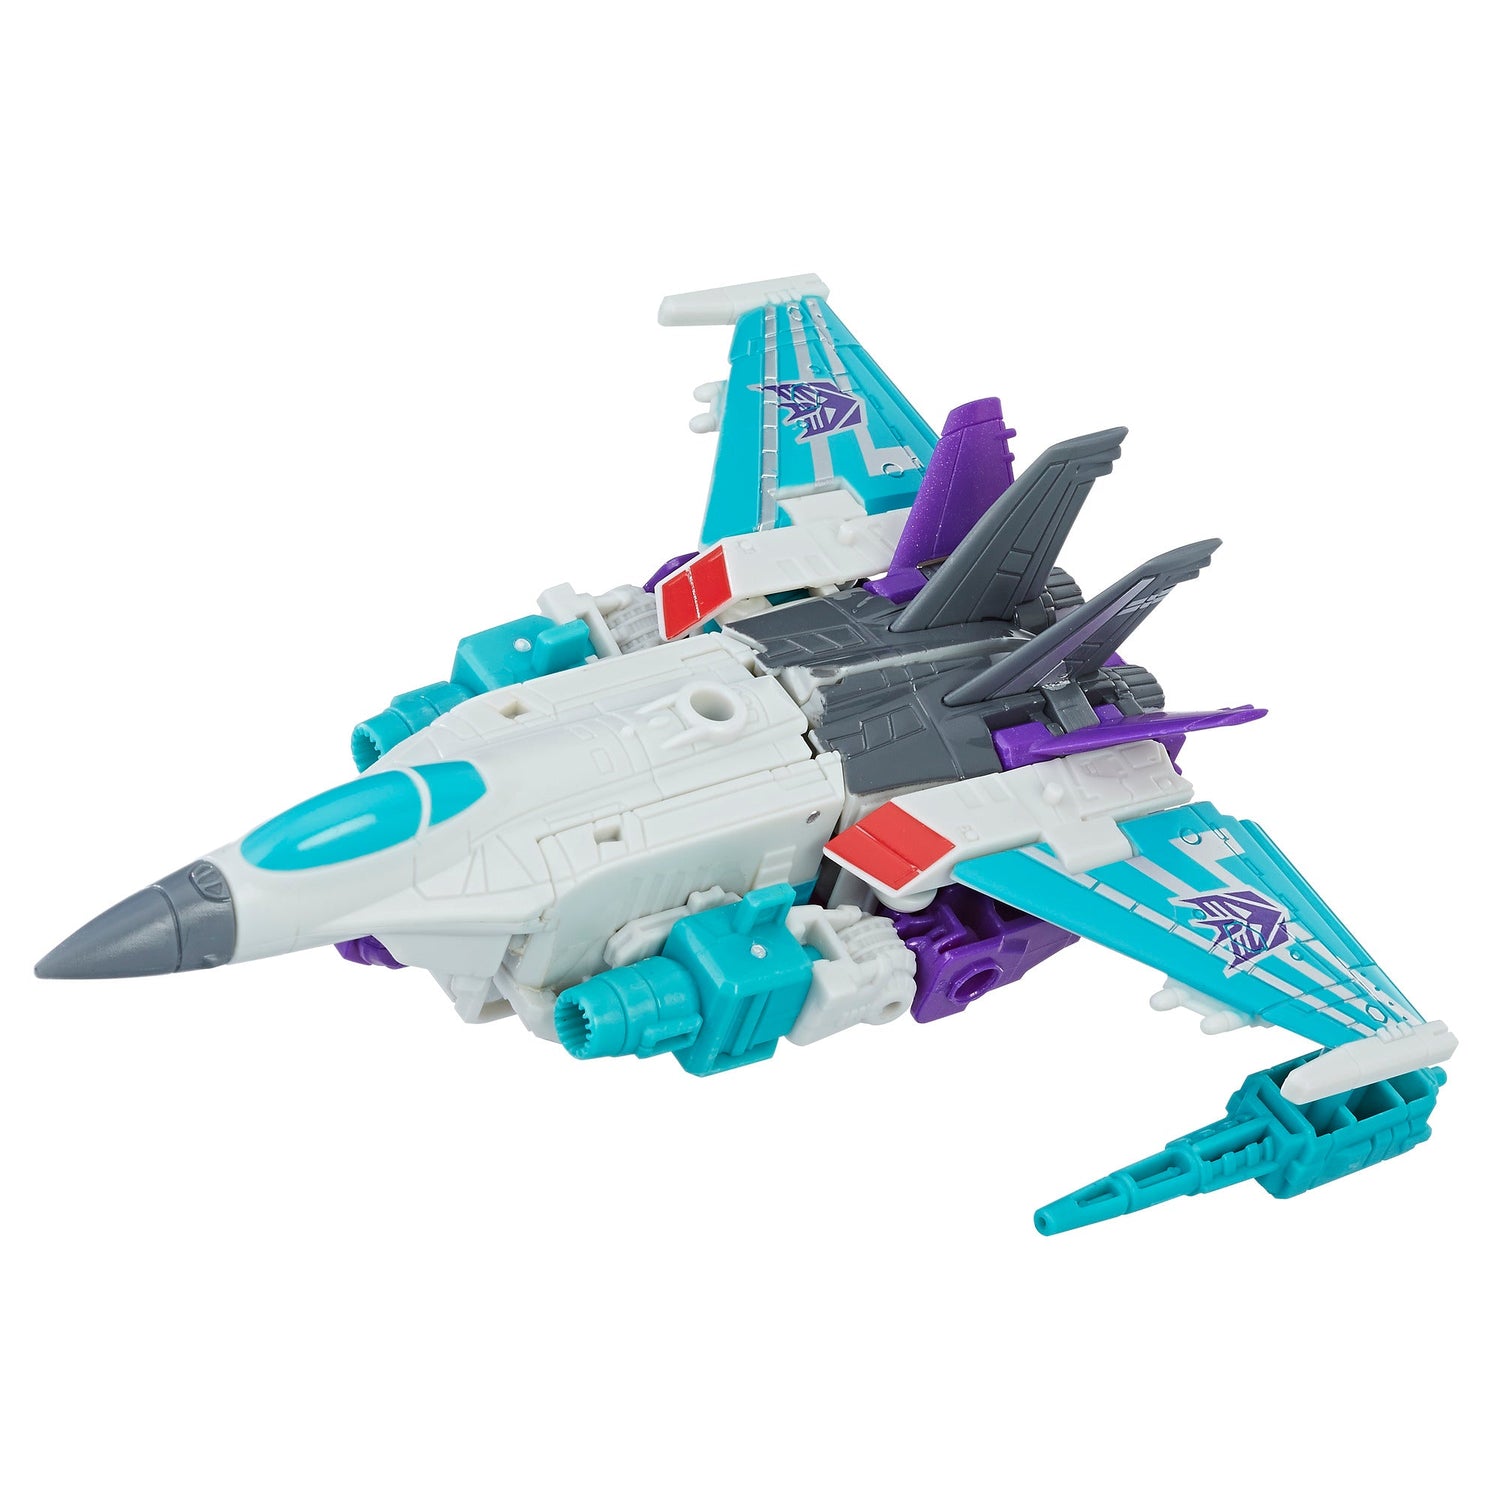 Transformers: Generations Power of the Primes Deluxe Class Dreadwind Figure